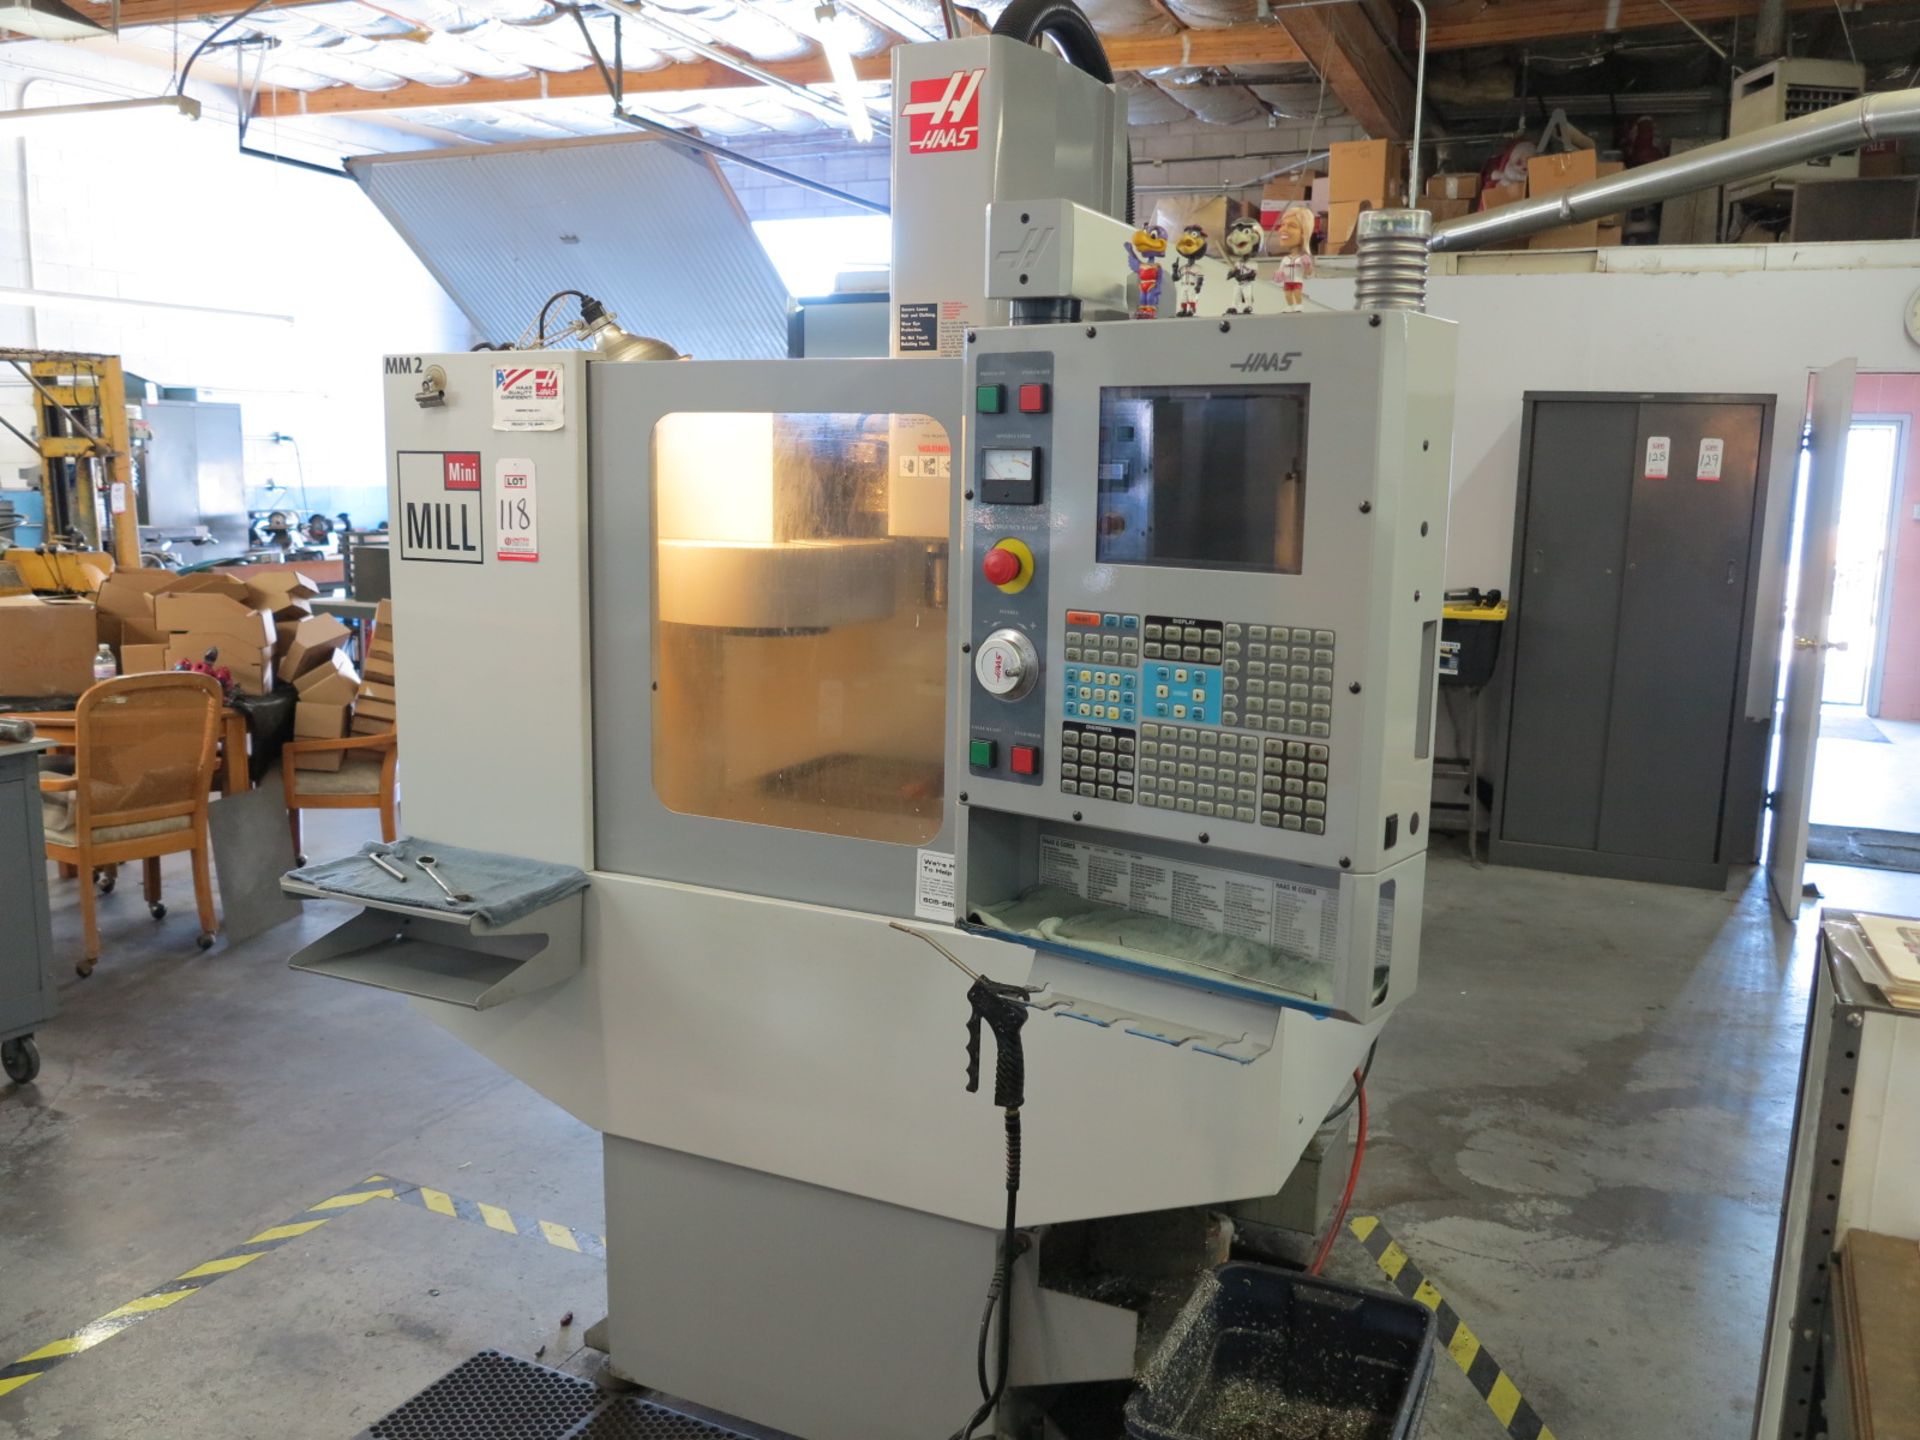 2004 HAAS MINI MILL CNC VERTICAL MILL, S/N 35025, 16" X, 12" Y, 10" Z, 36" X 12" TABLE, 10,000 RPM - Image 5 of 11